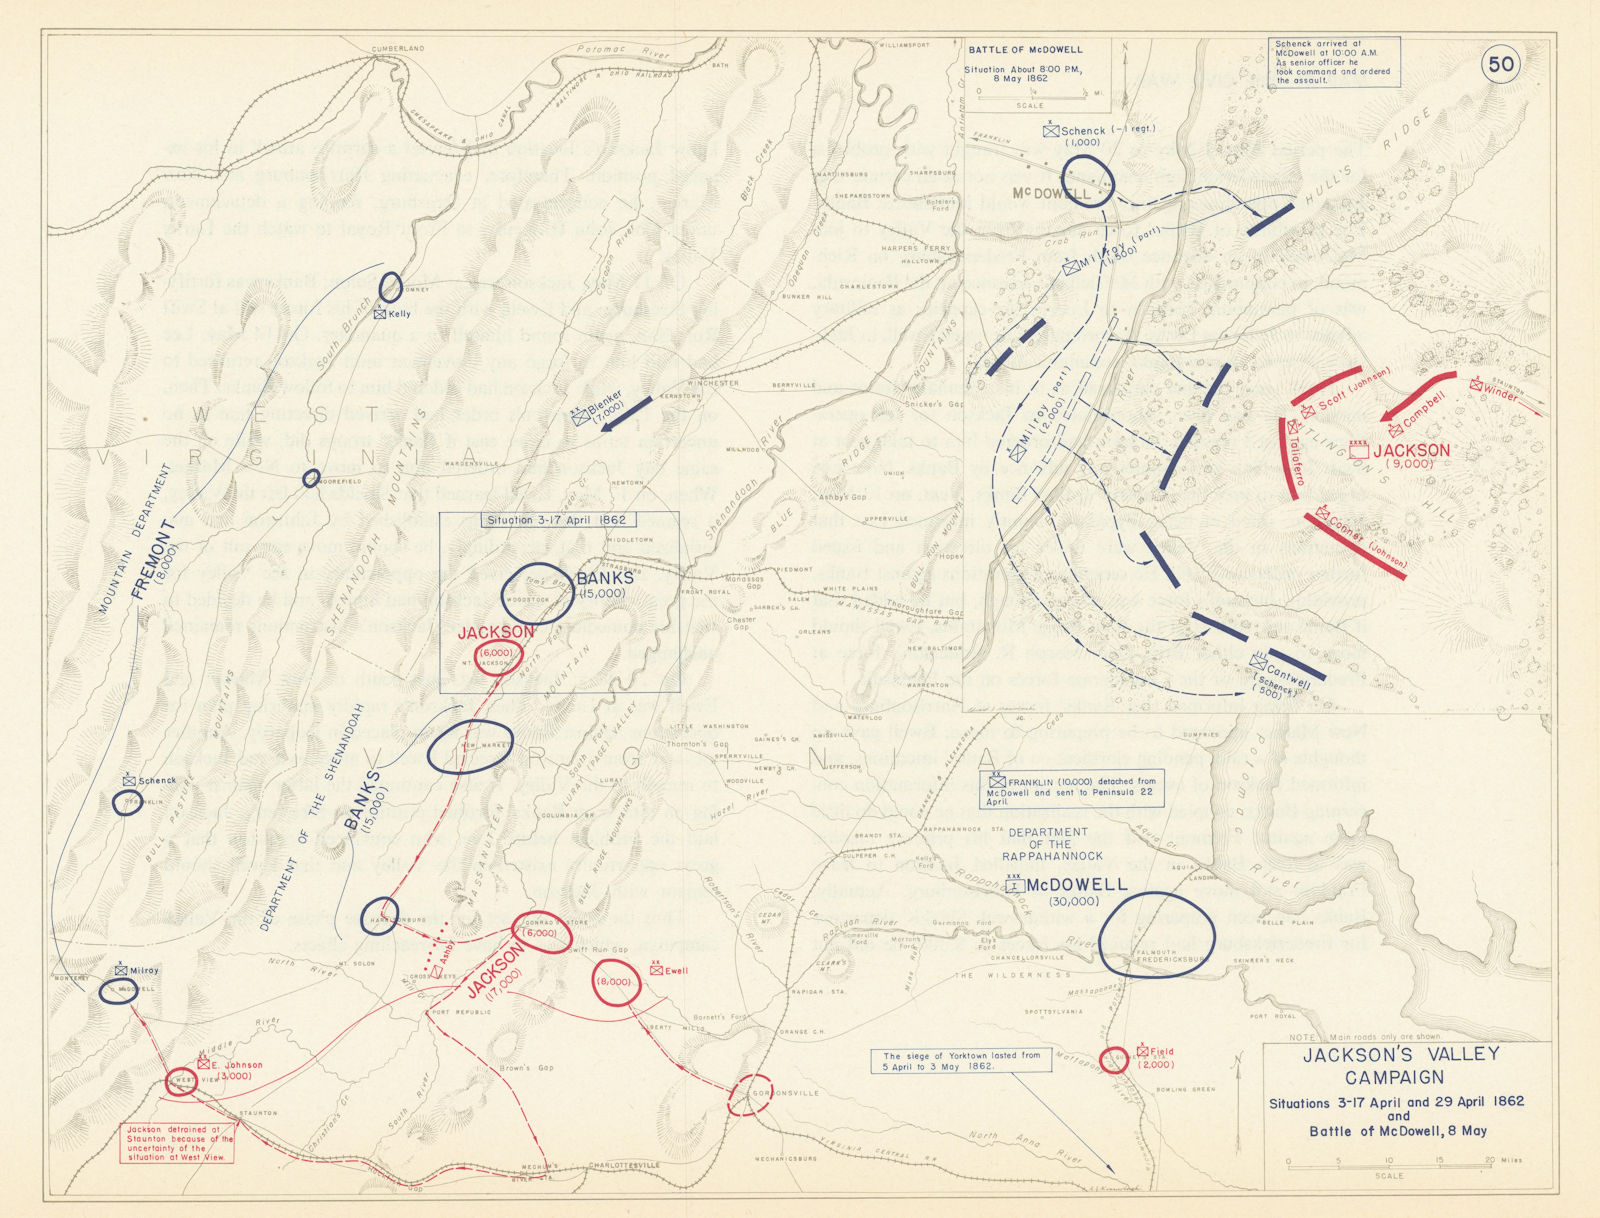 American Civil War. April-May 1862 Jackson's Valley Campaign. McDowell 1959 map